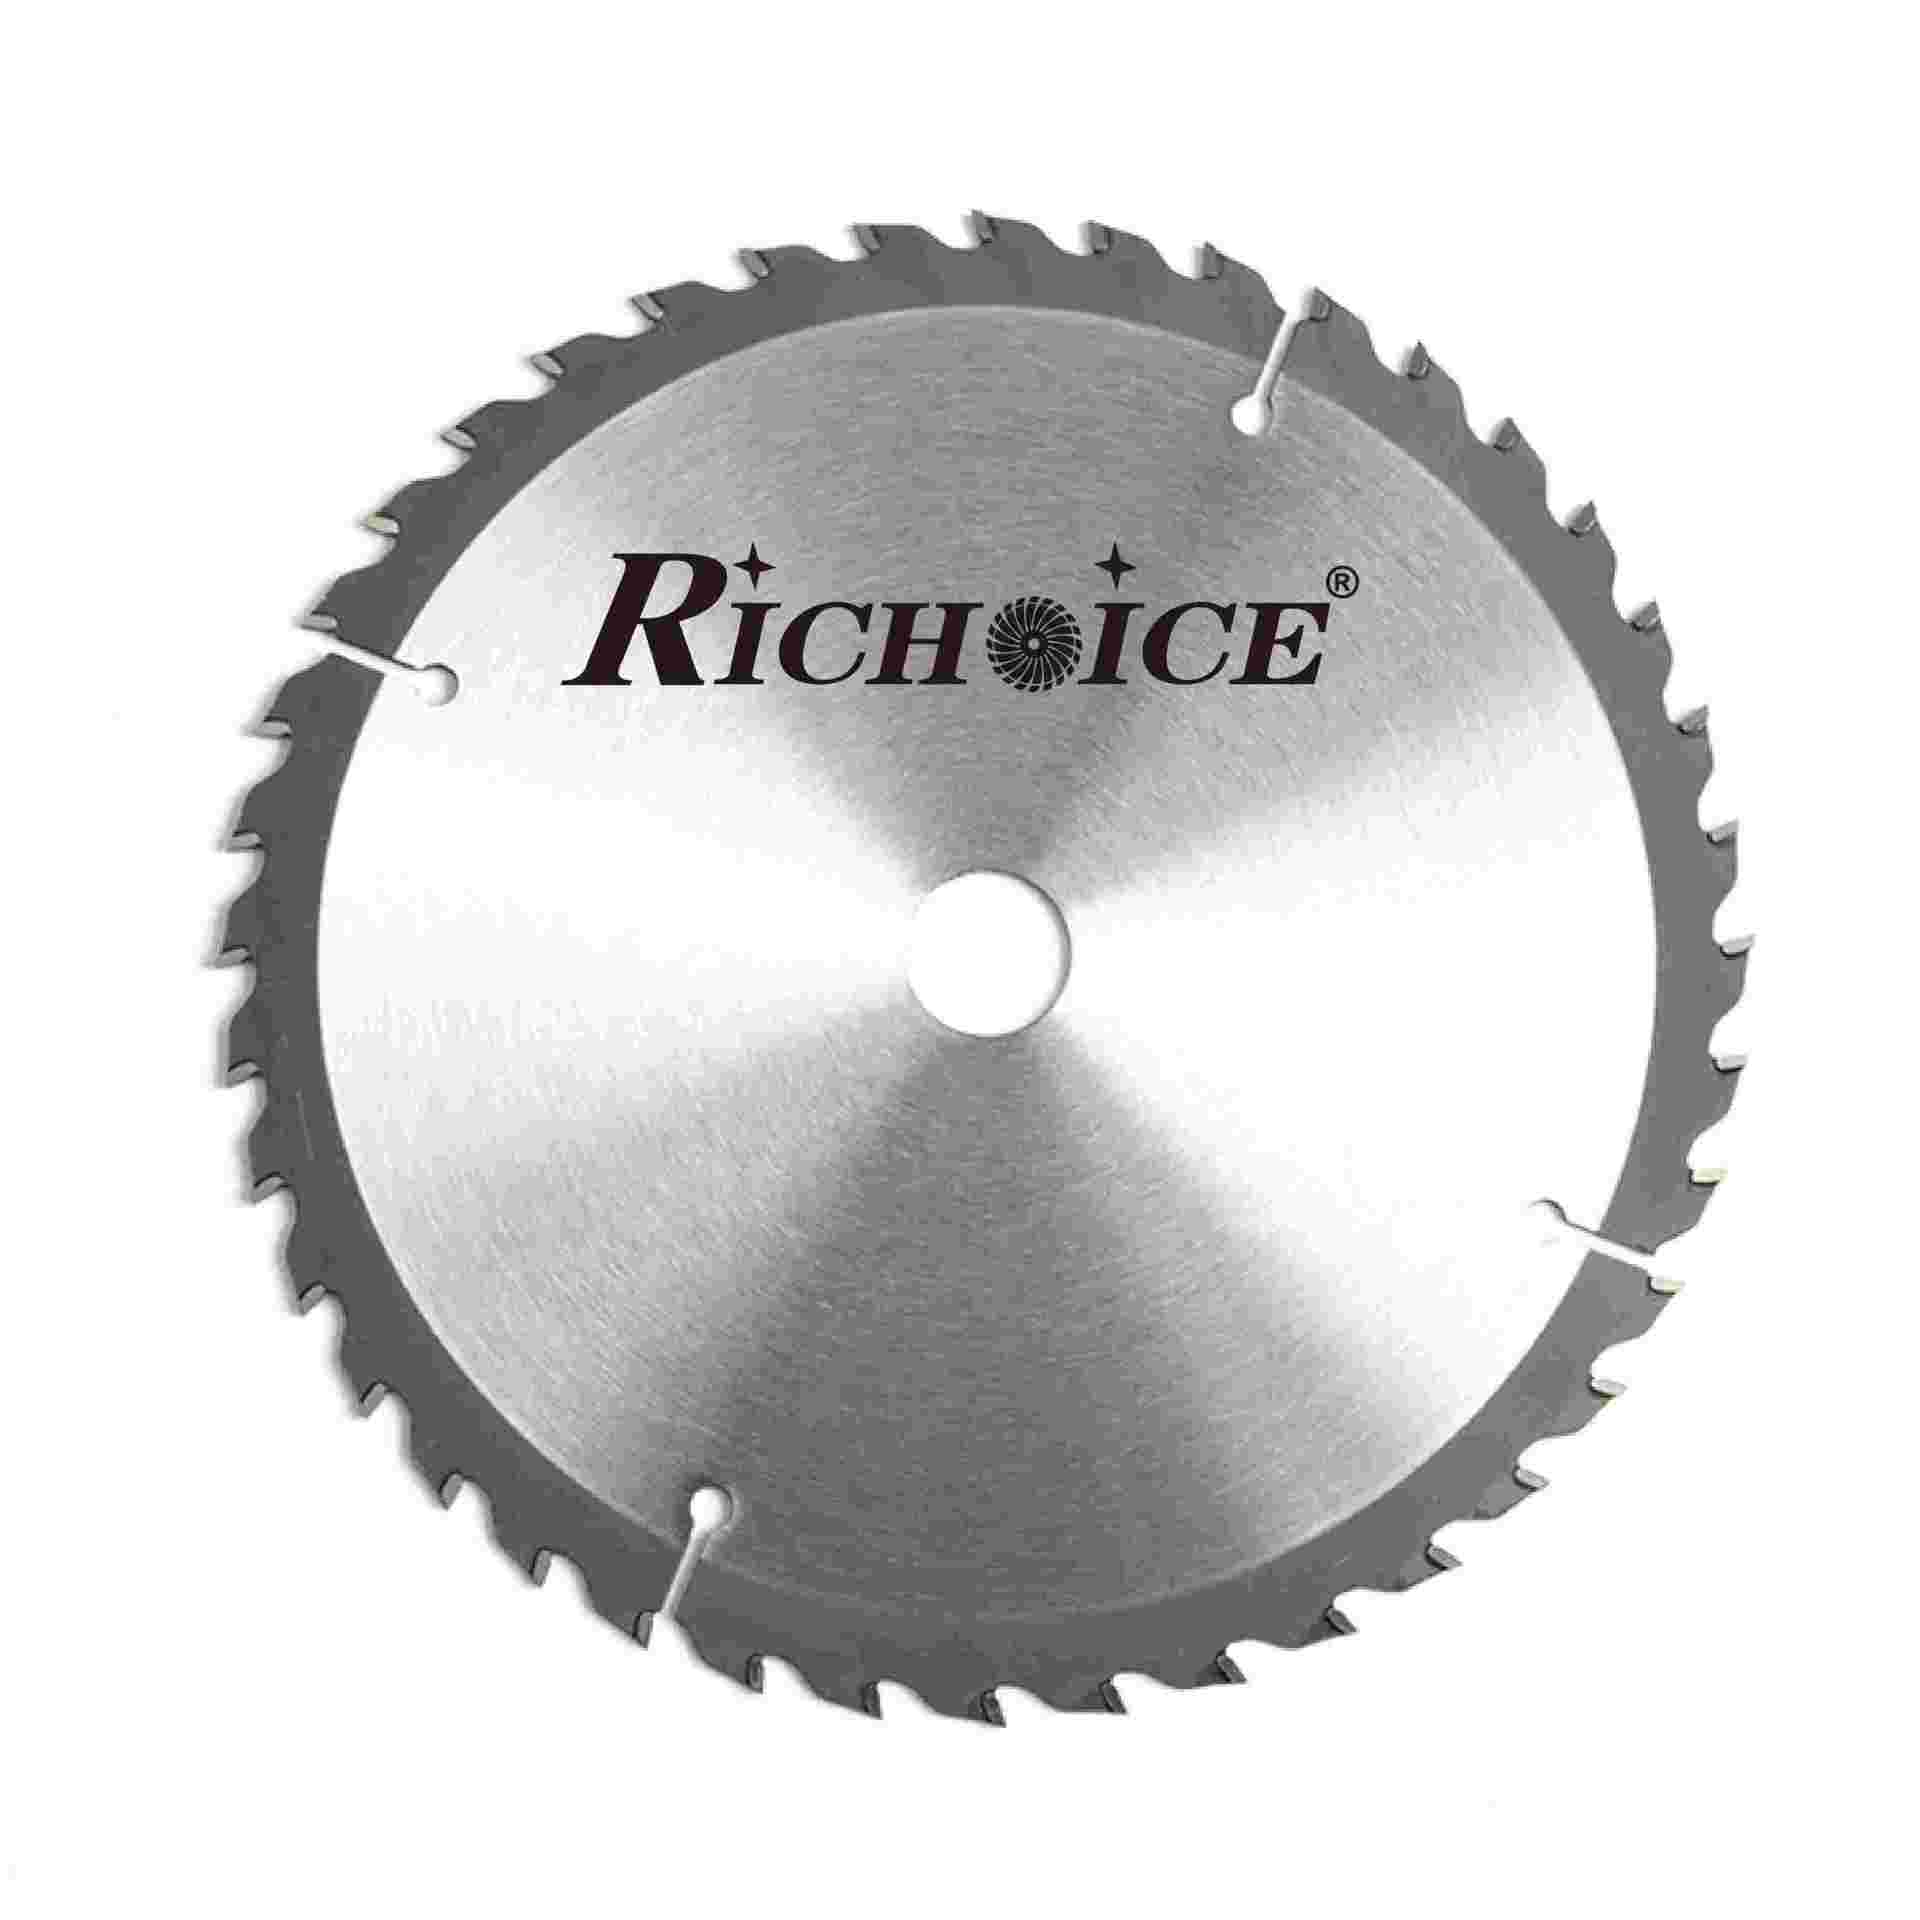 High Quality TCT Saw Blade for Super Thin Kerf Wood Cutting